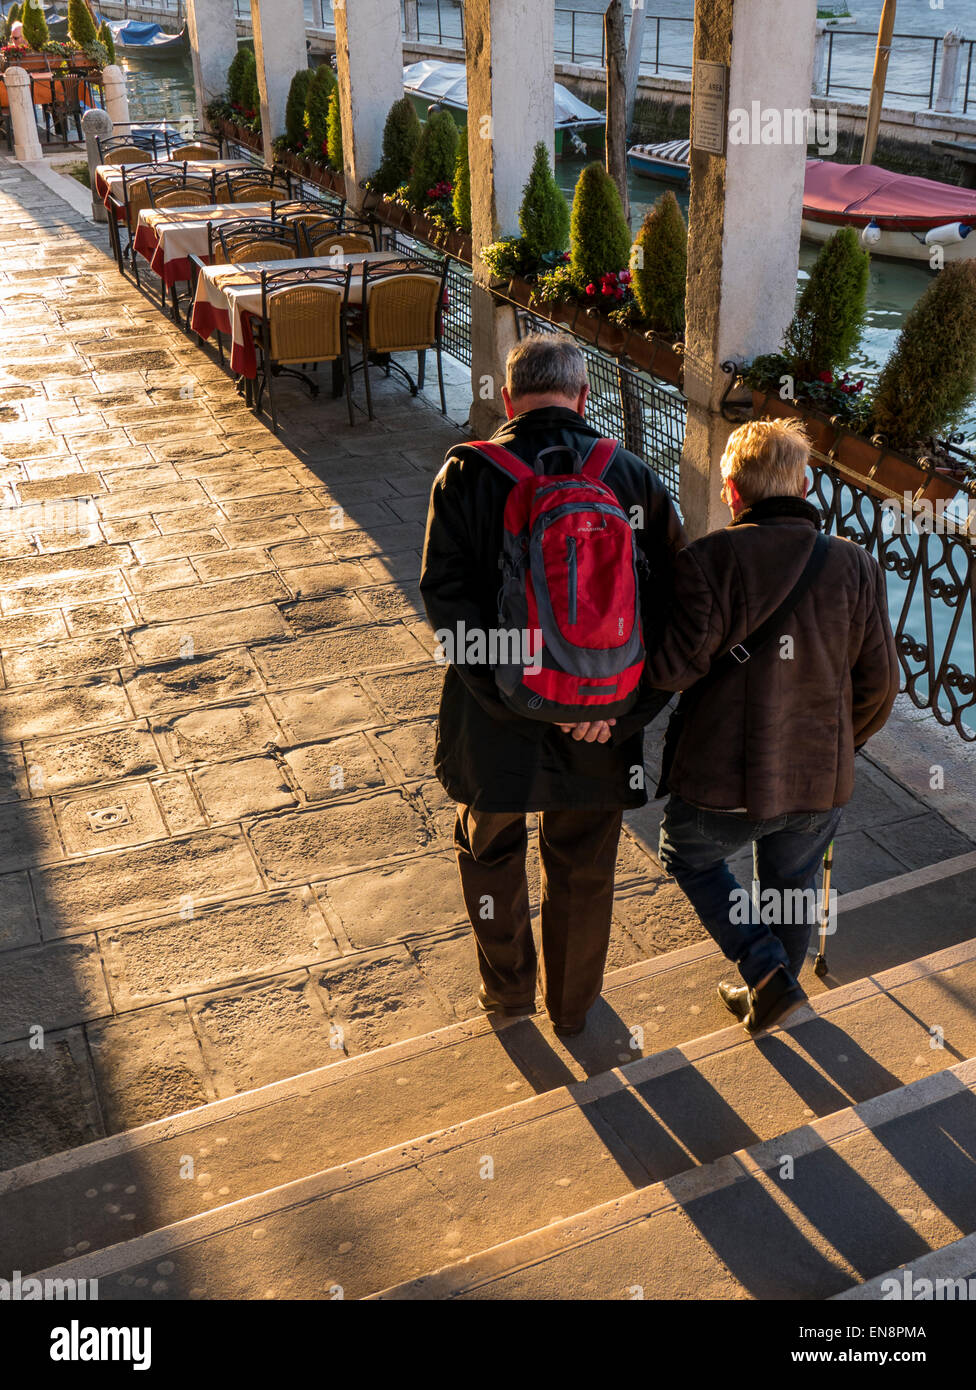 Tourists & locals walking cobblestone paths, Venice, Italy, City of Canals Stock Photo